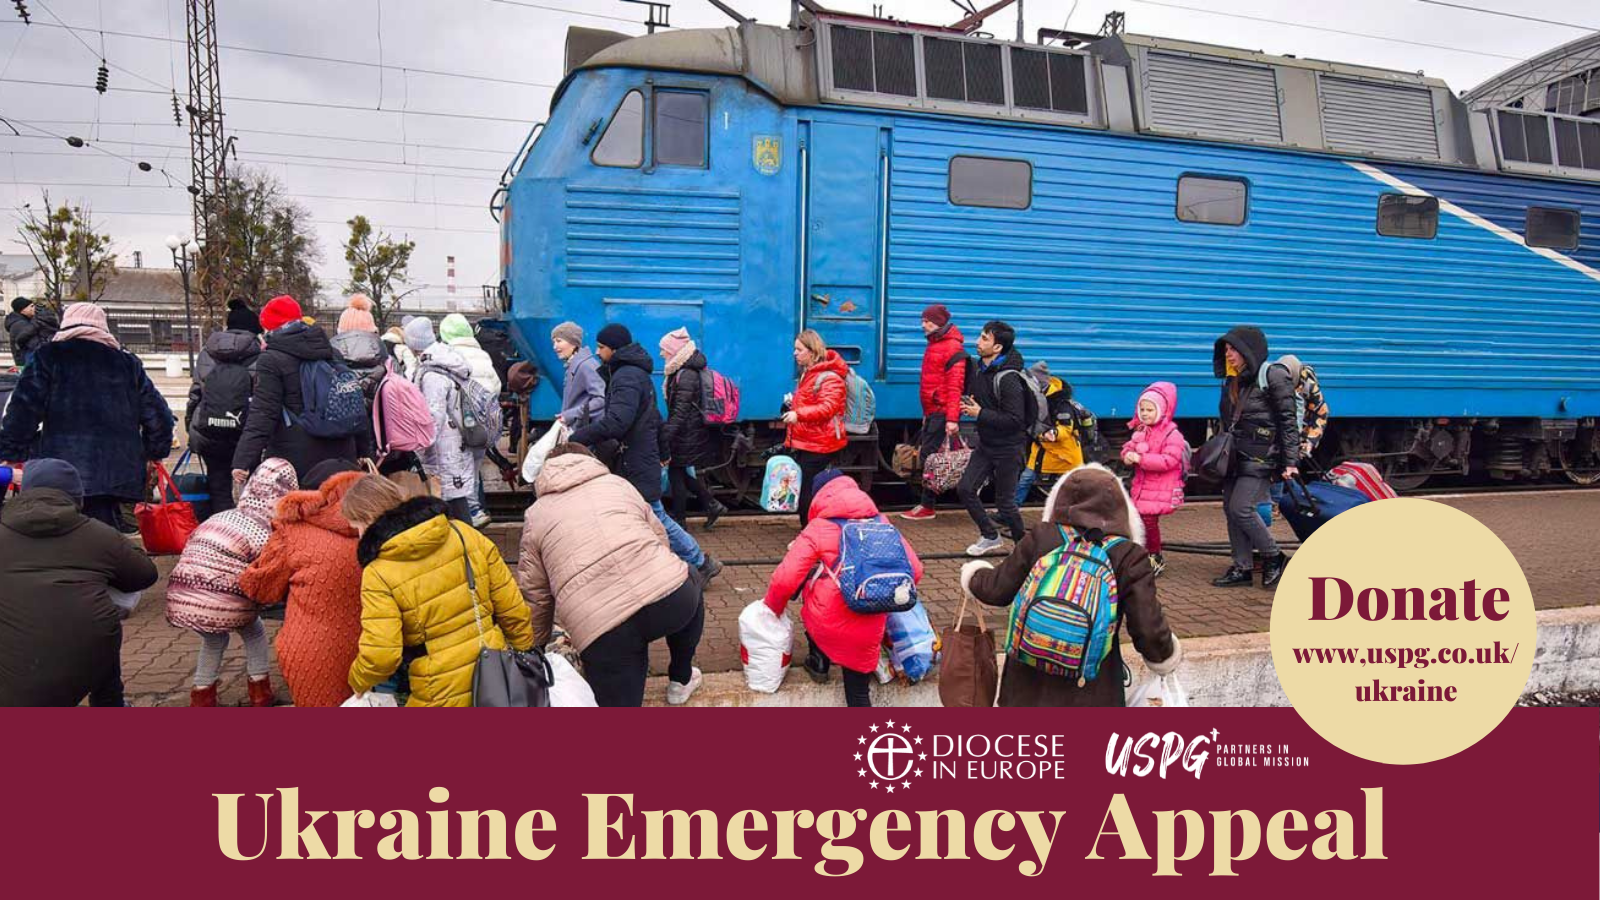 A poster for the Ukraine Emergency appeal.